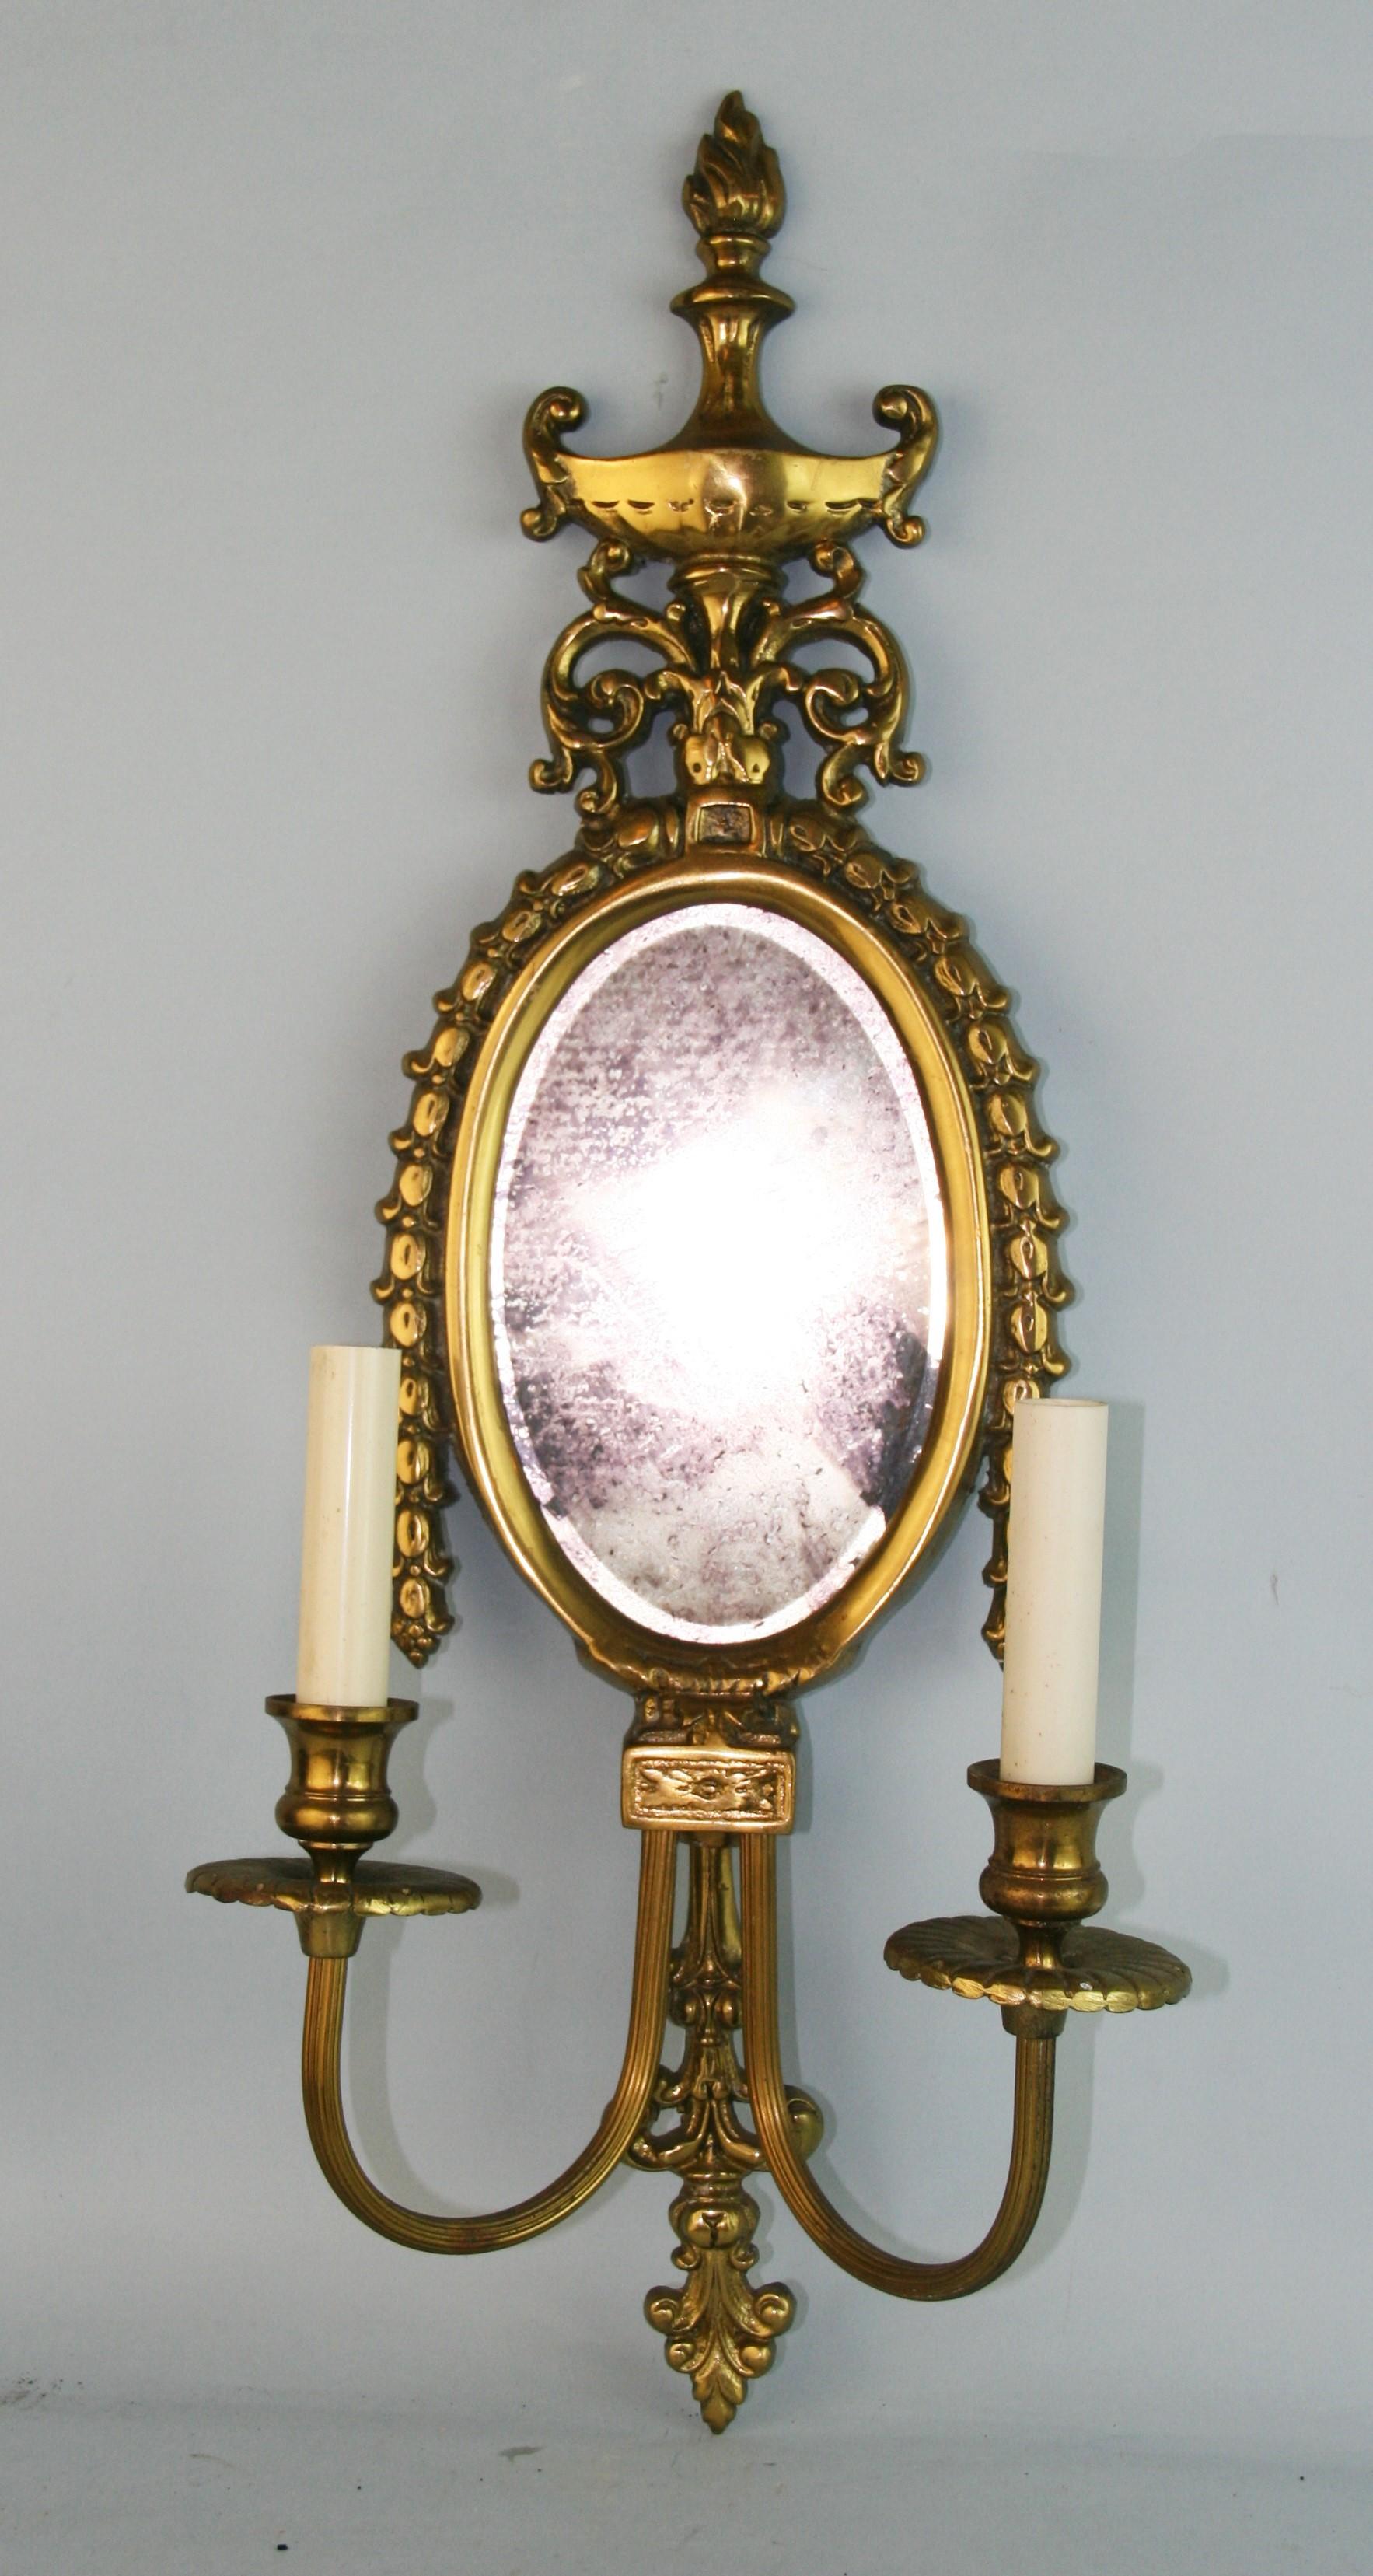 1258 Gorgeous vintage solid brass wall sconces with beveled mirror.
The double candle arms detail a rope pattern.